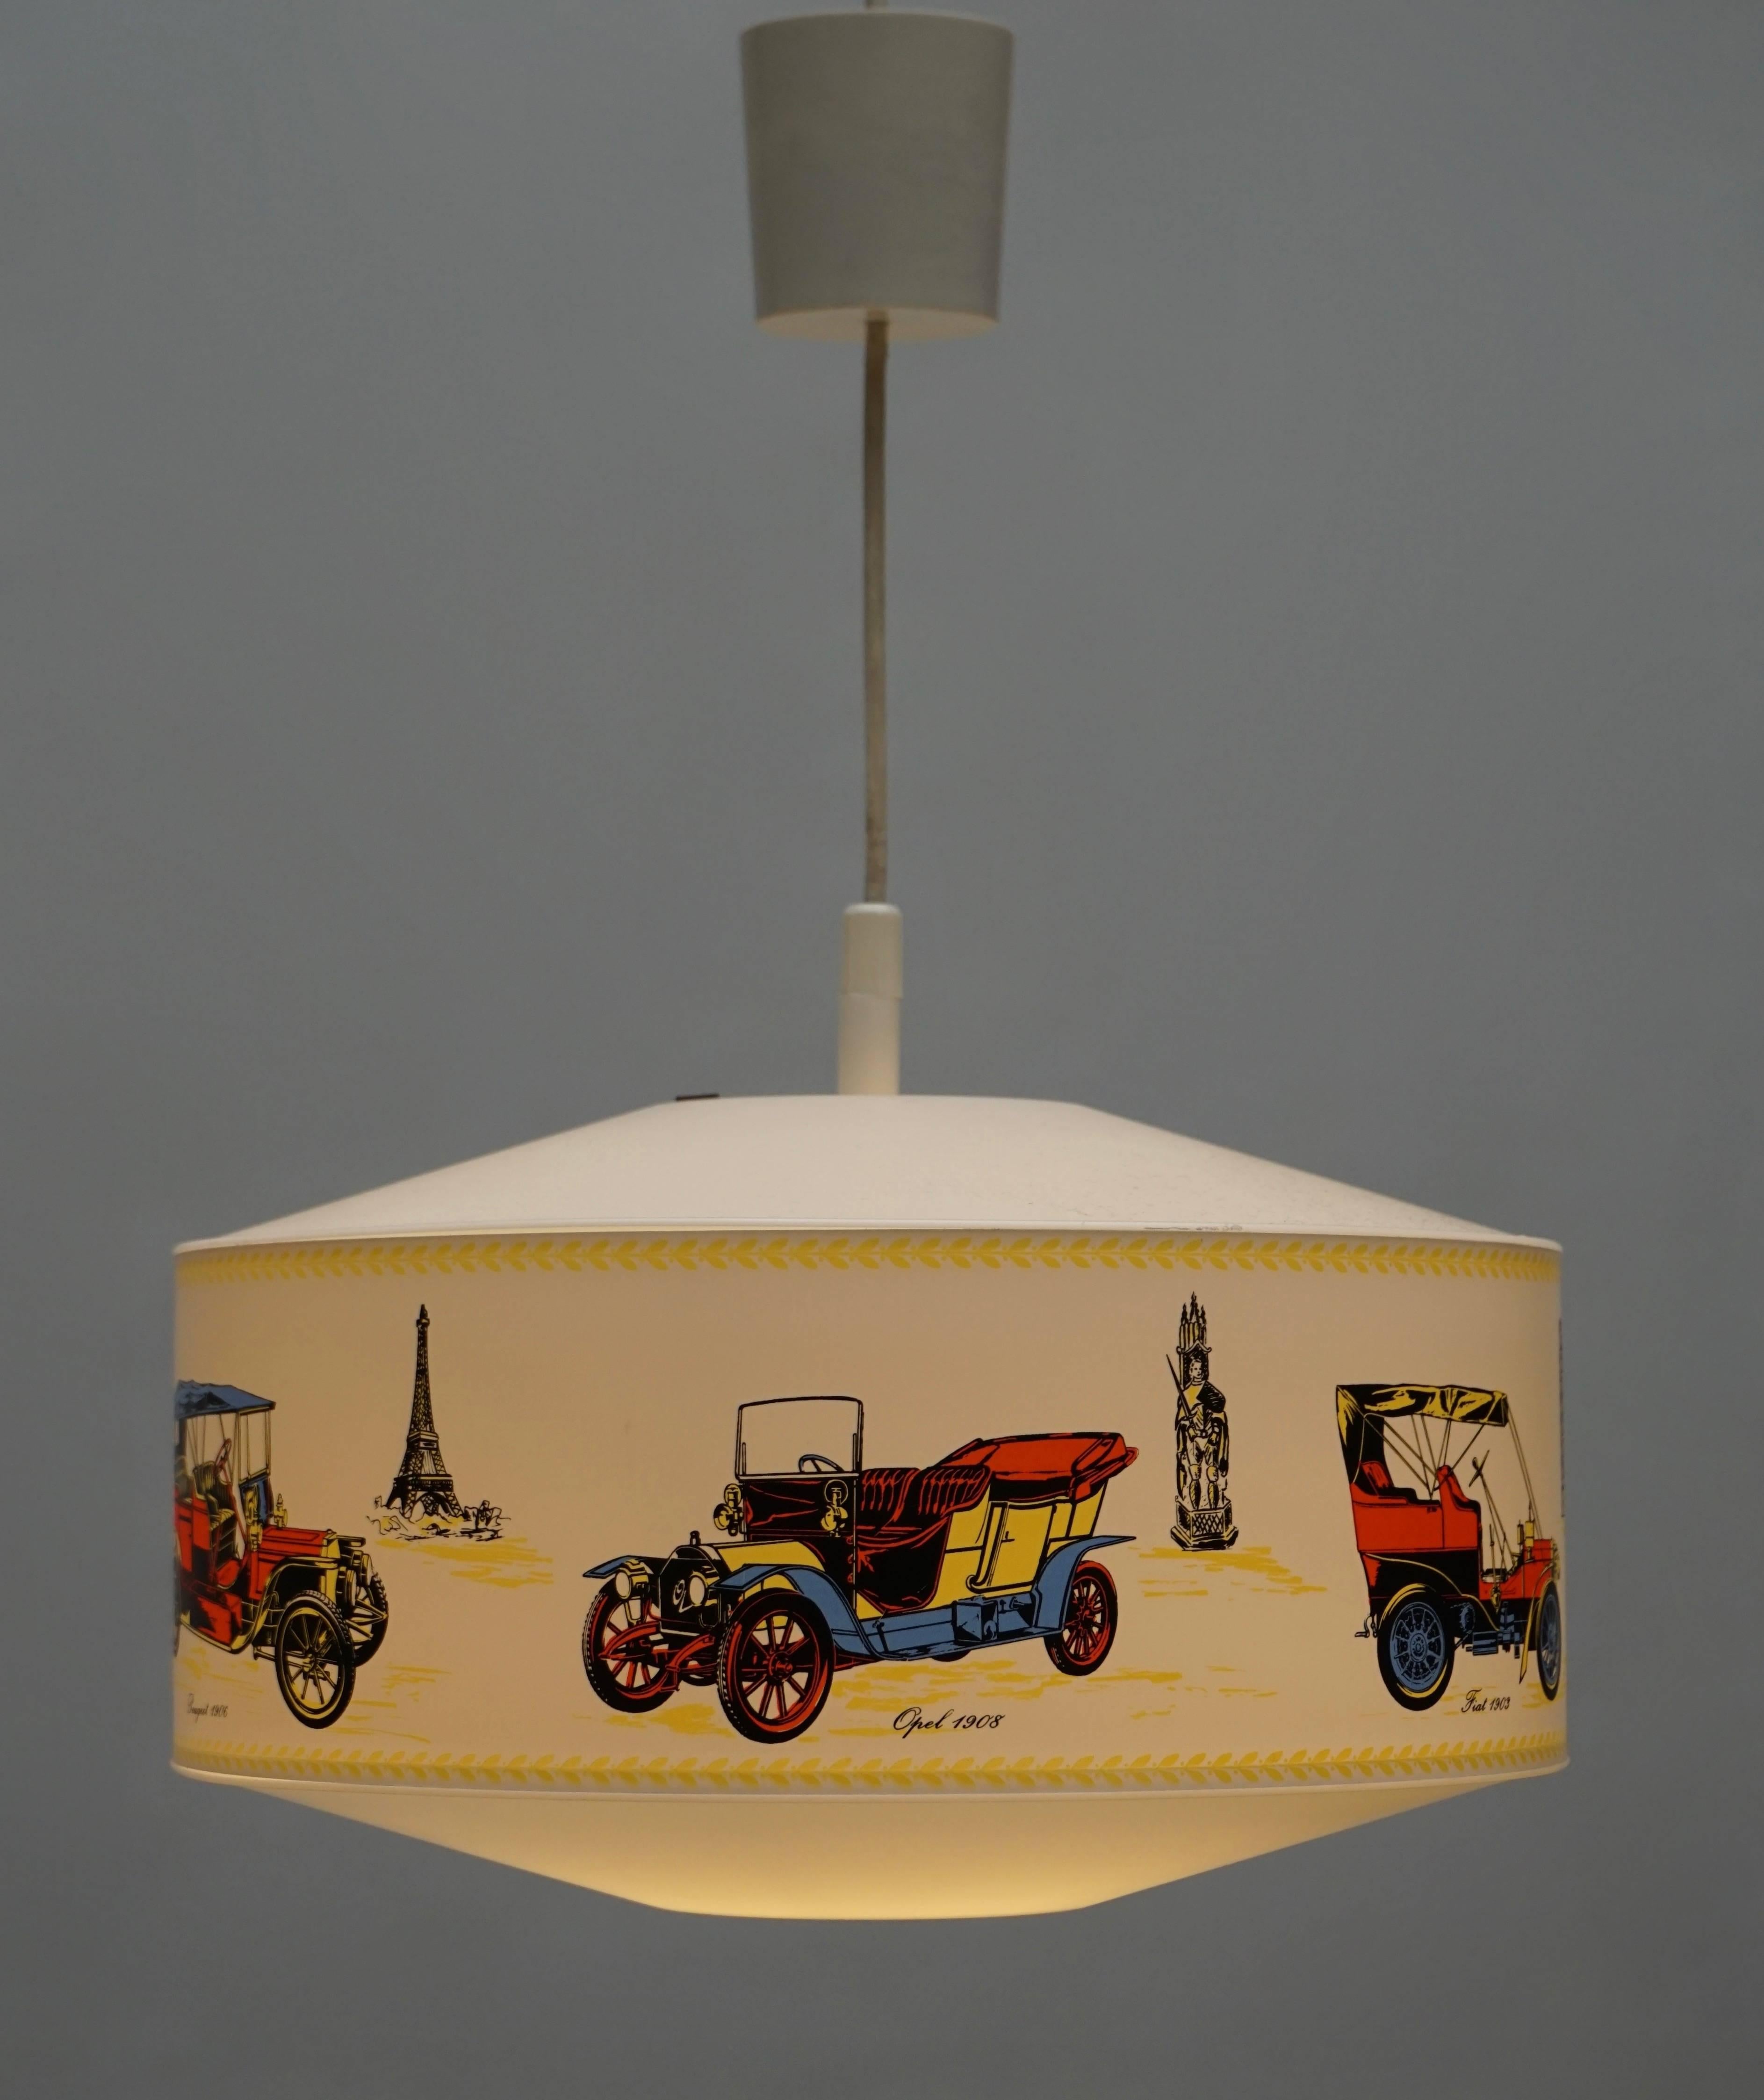 Pendant light decorated with vintage cars, statue of liberty, Eiffel tower, tower of Pisa.
Measures: Diameter 35 cm.
Height fixture 18 cm.
Total height 60 cm.